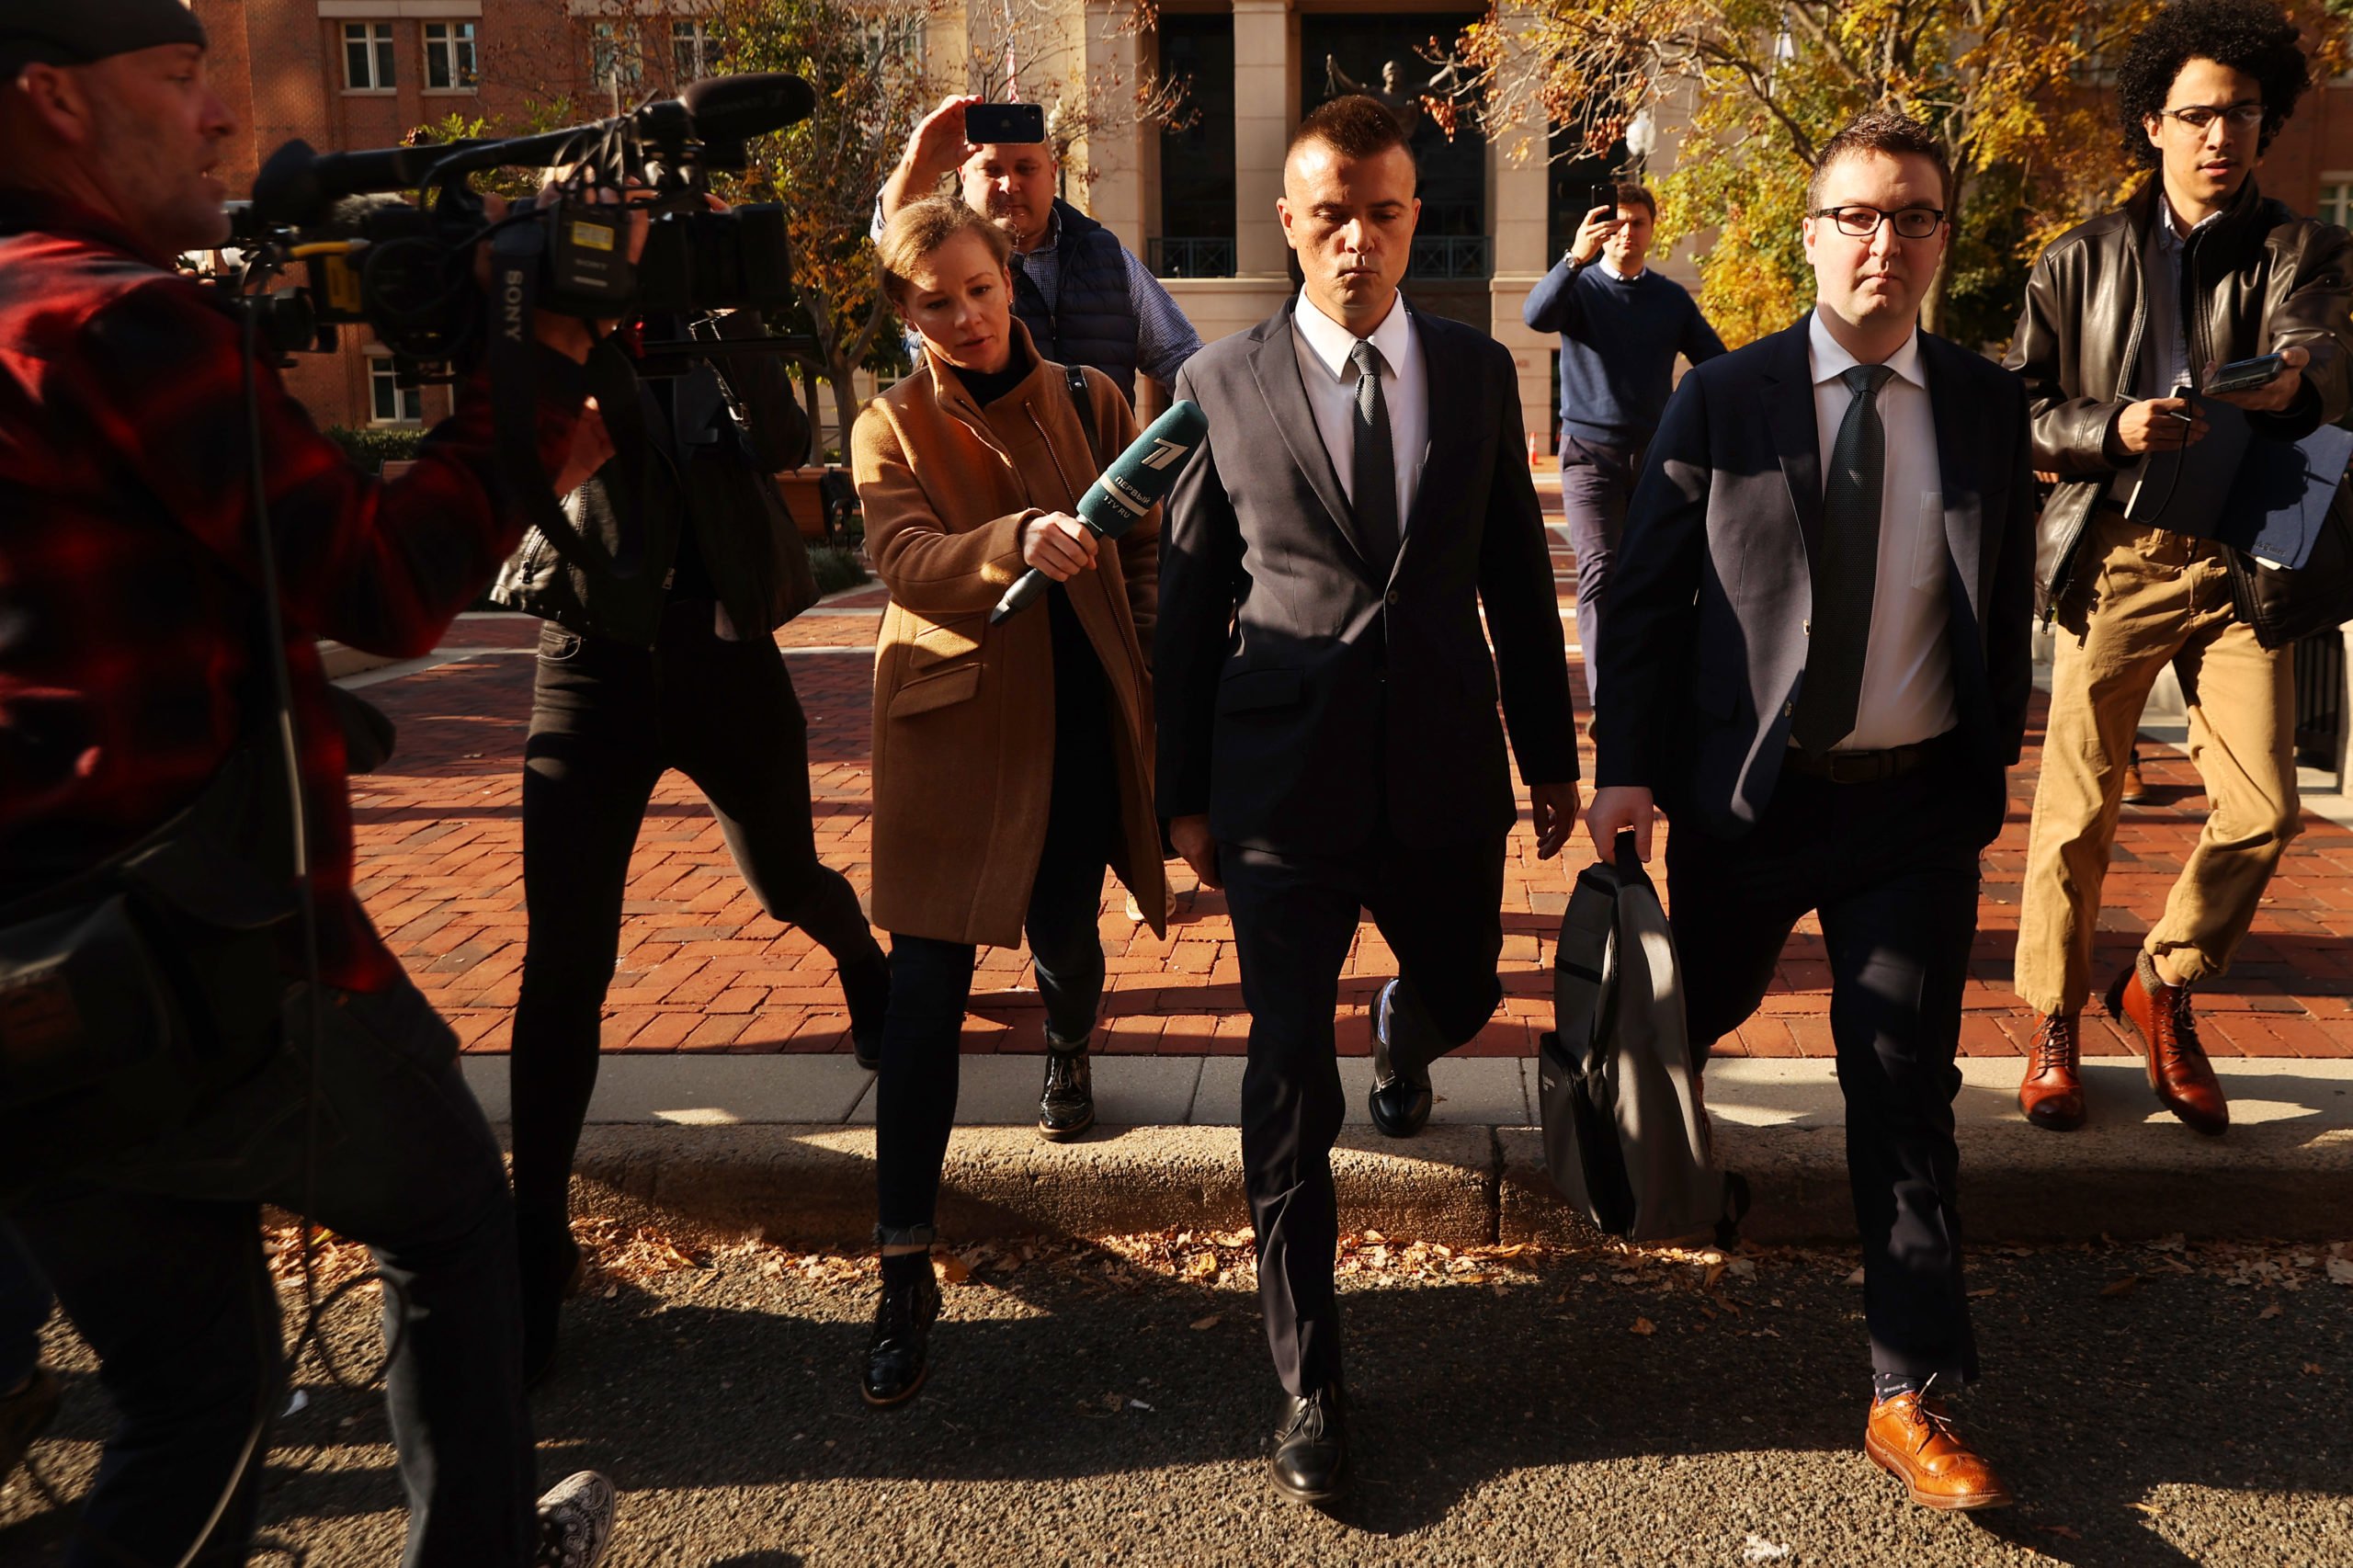 ALEXANDRIA, VA - NOVEMBER 10: Russian analyst Igor Danchenko is pursued by journalists as he departs the Albert V. Bryan U.S. Courthouse after being arraigned on November 10, 2021 in Alexandria, Virginia. Danchenko has been charged with five counts of making false statements to the FBI regarding the sources of the information he gave the British firm that created the so-called "Steele Dossier," which alleged potential ties between the 2016 Trump campaign and Russia. (Photo by Chip Somodevilla/Getty Images)